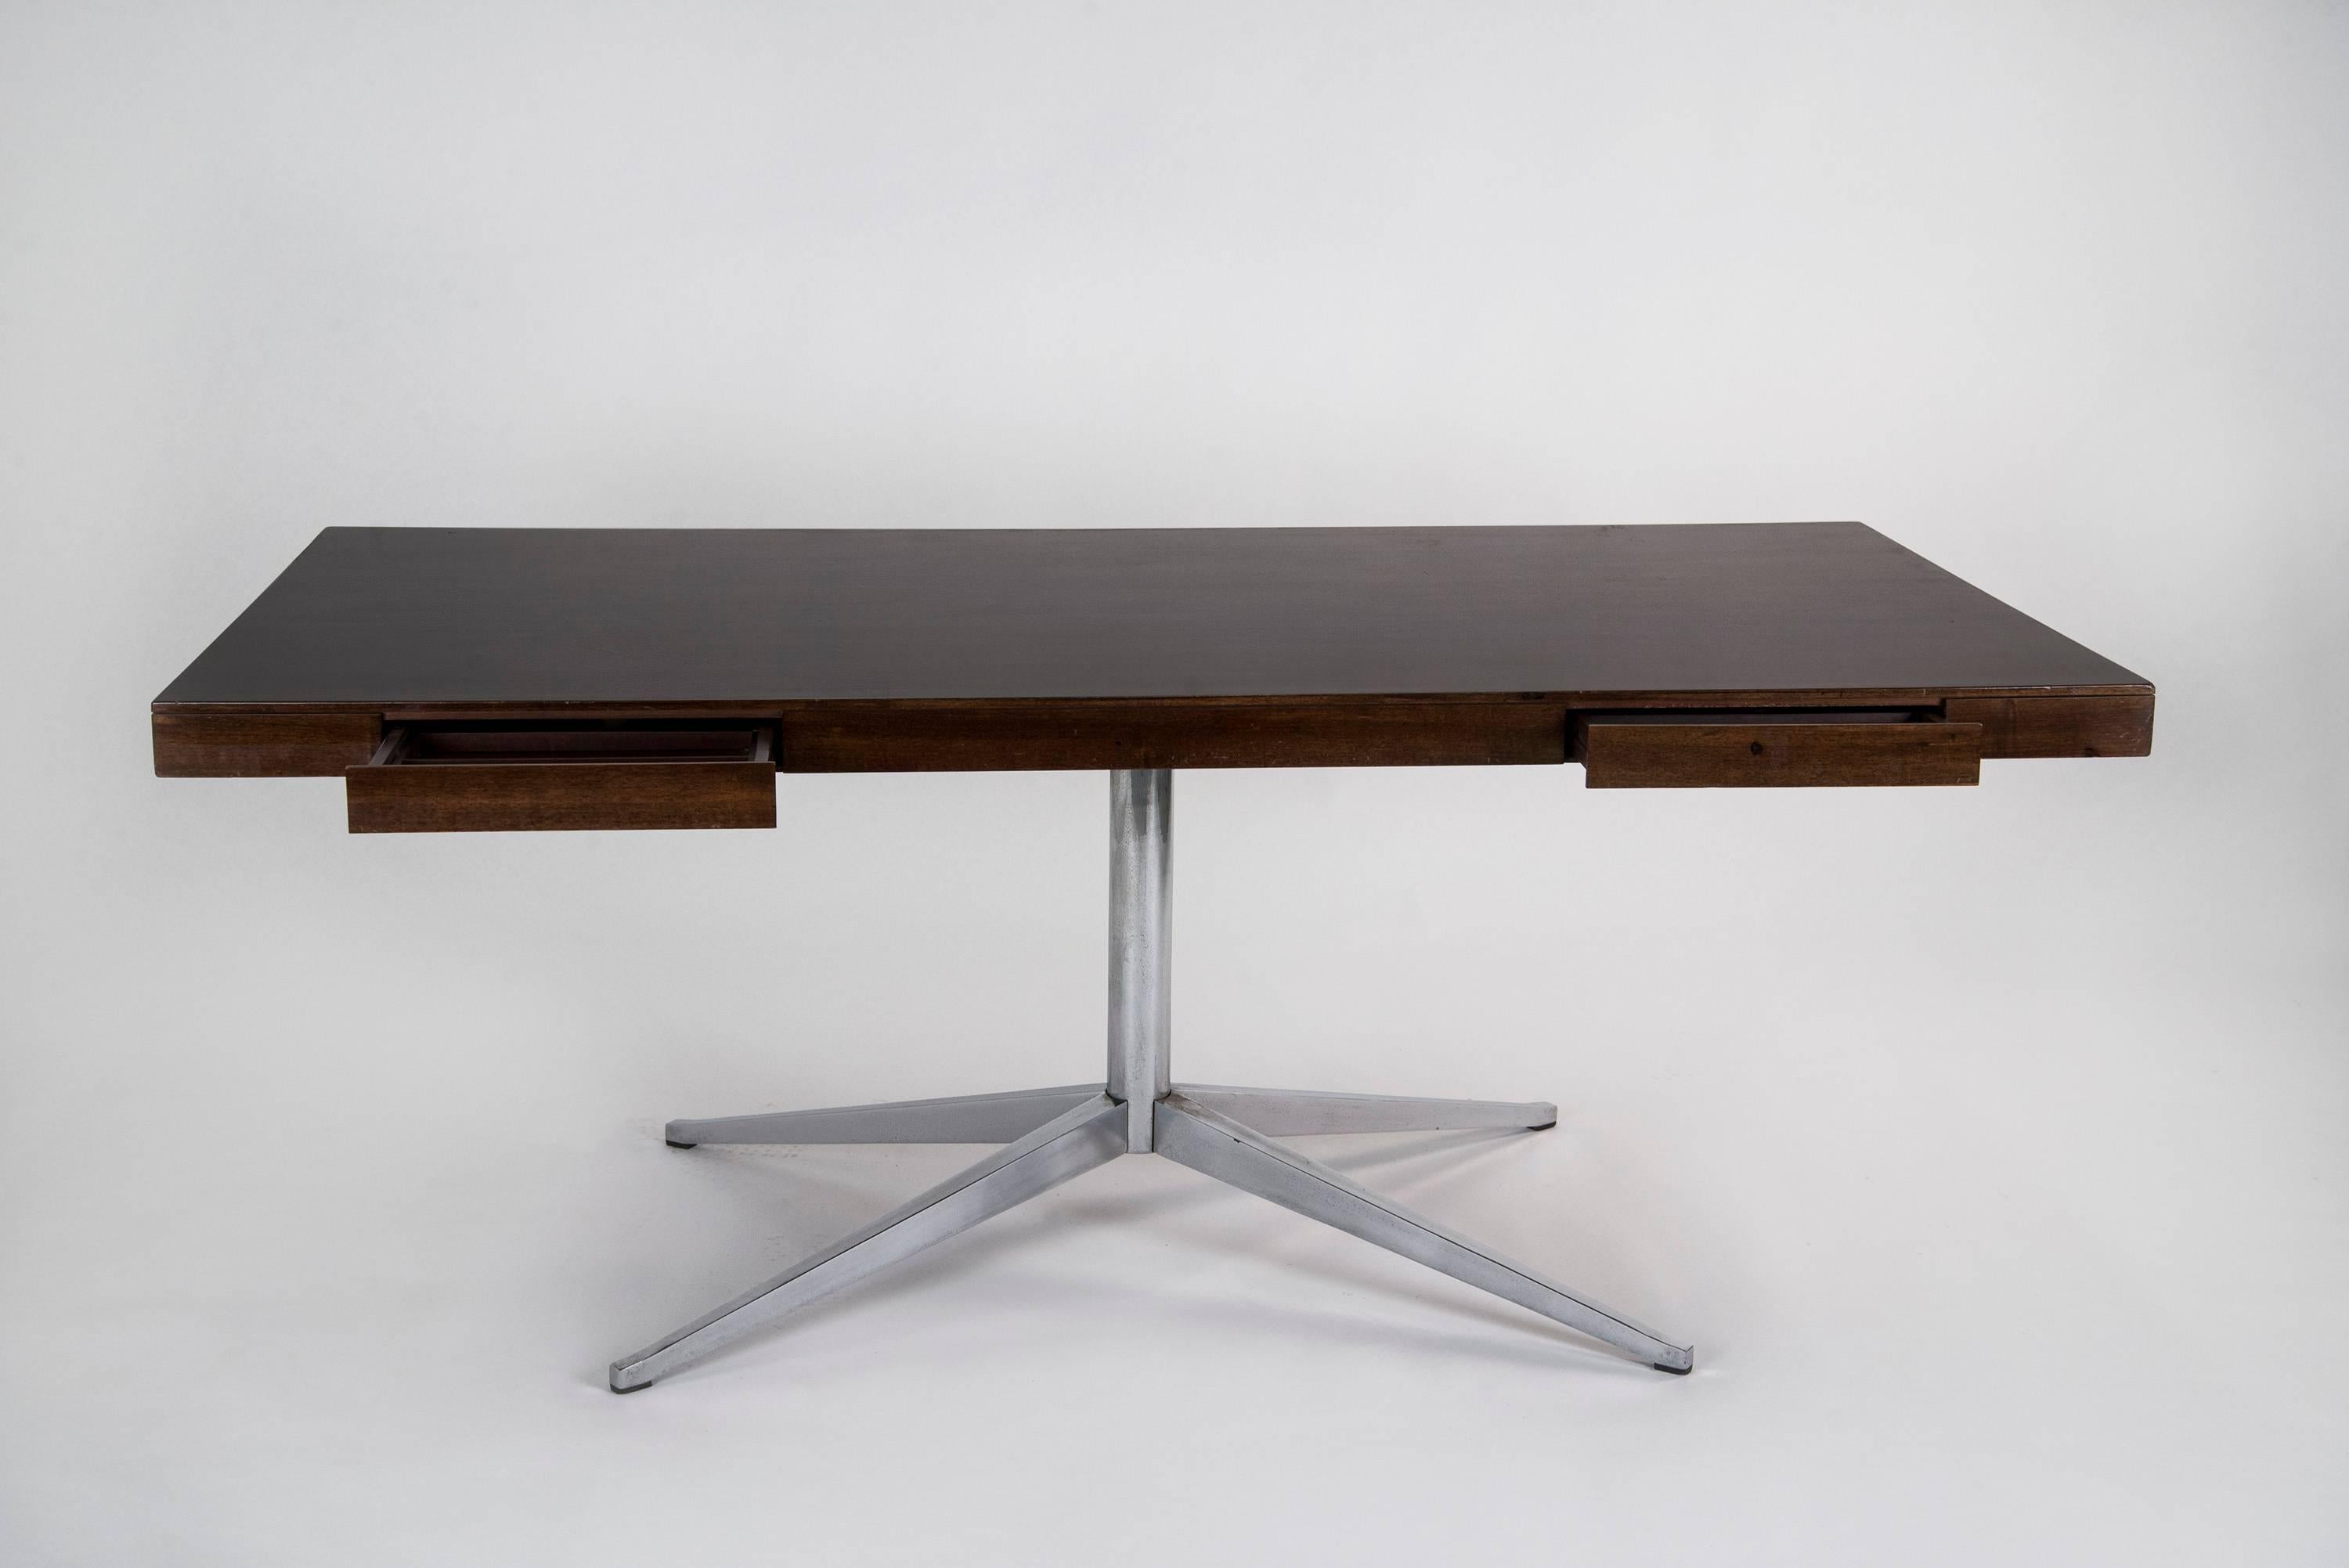 Extraordinary executive desk designed by Florence Knoll for Knoll in 1961. Chrome-plated steel base, massive walnut top with two drawers on both sides. Good original vintage conditions.